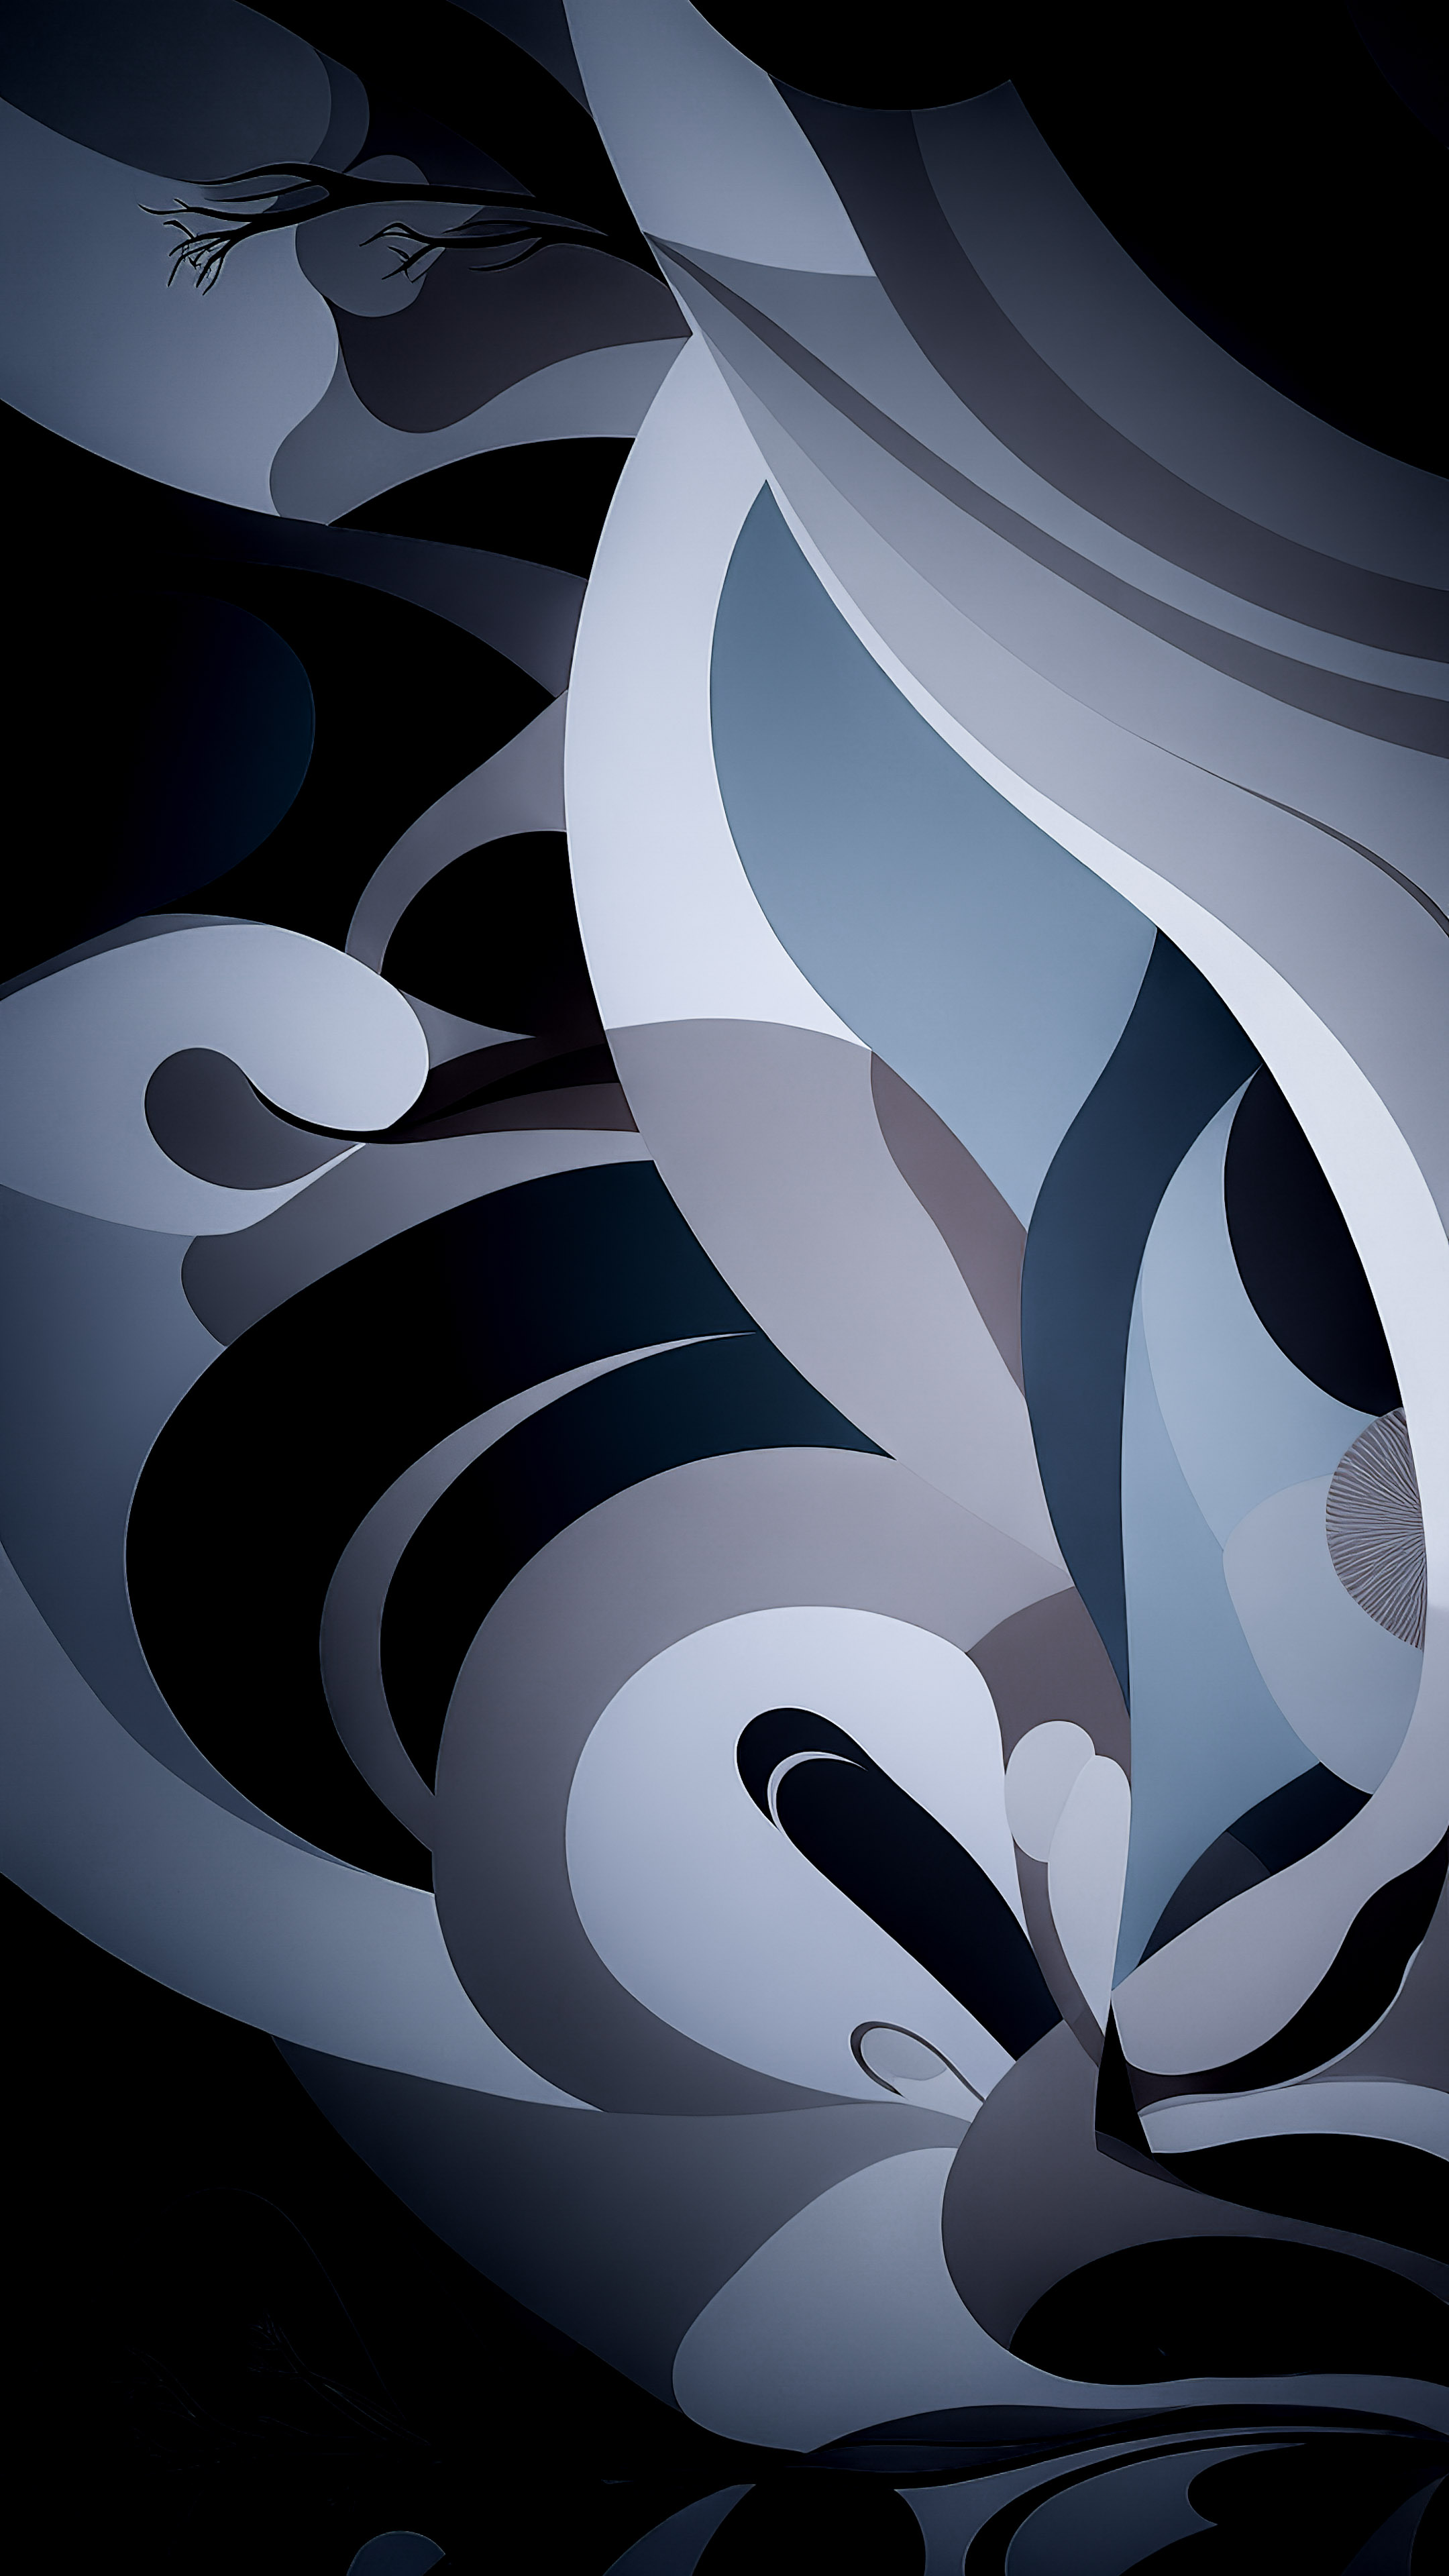 Explore the depths of abstract wallpaper 4K Android dark, incorporating organic shapes, flowing lines, and earthy colors.